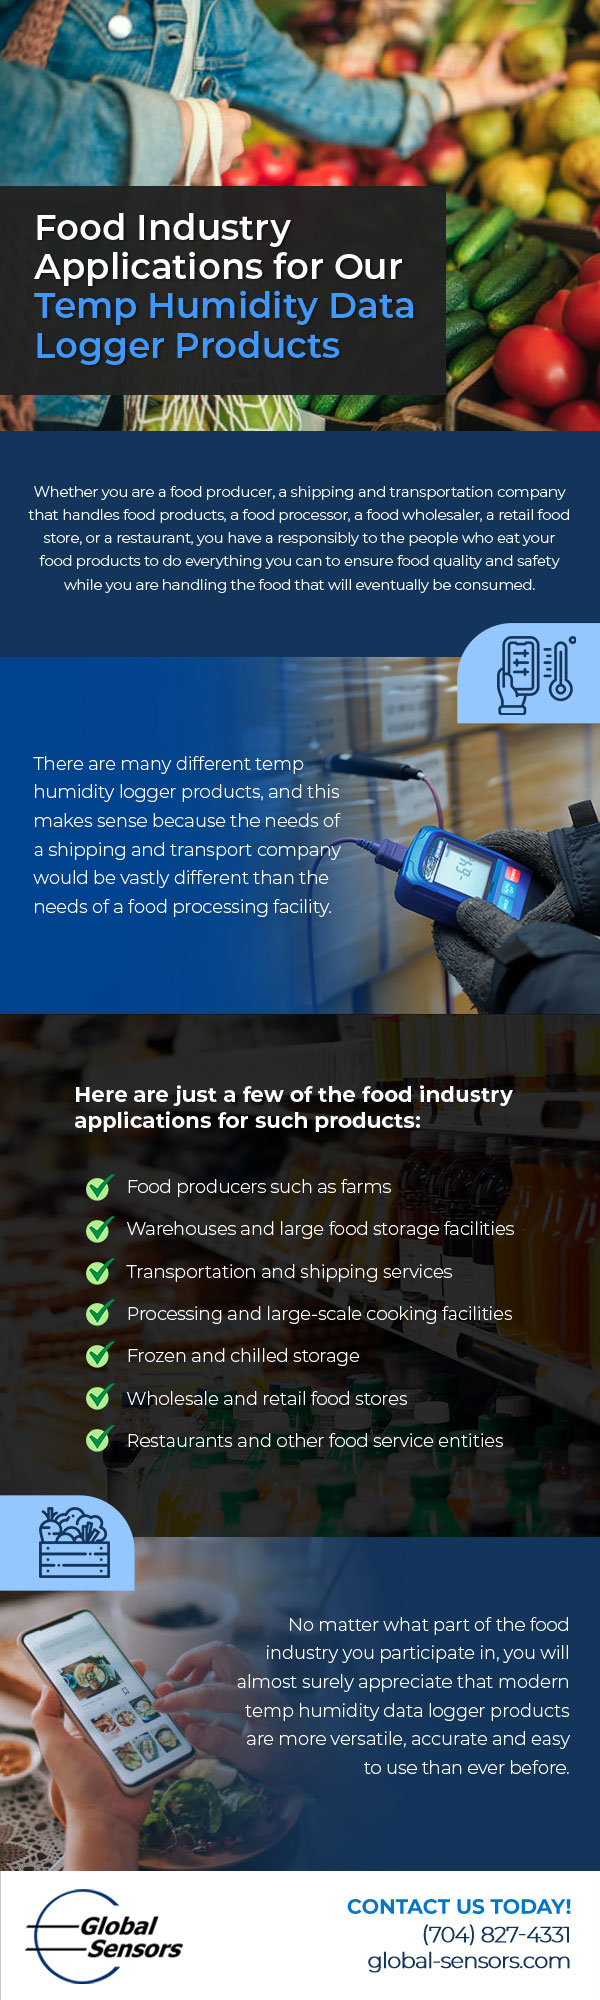 Food Industry Applications for Our Temp Humidity Data Logger Products